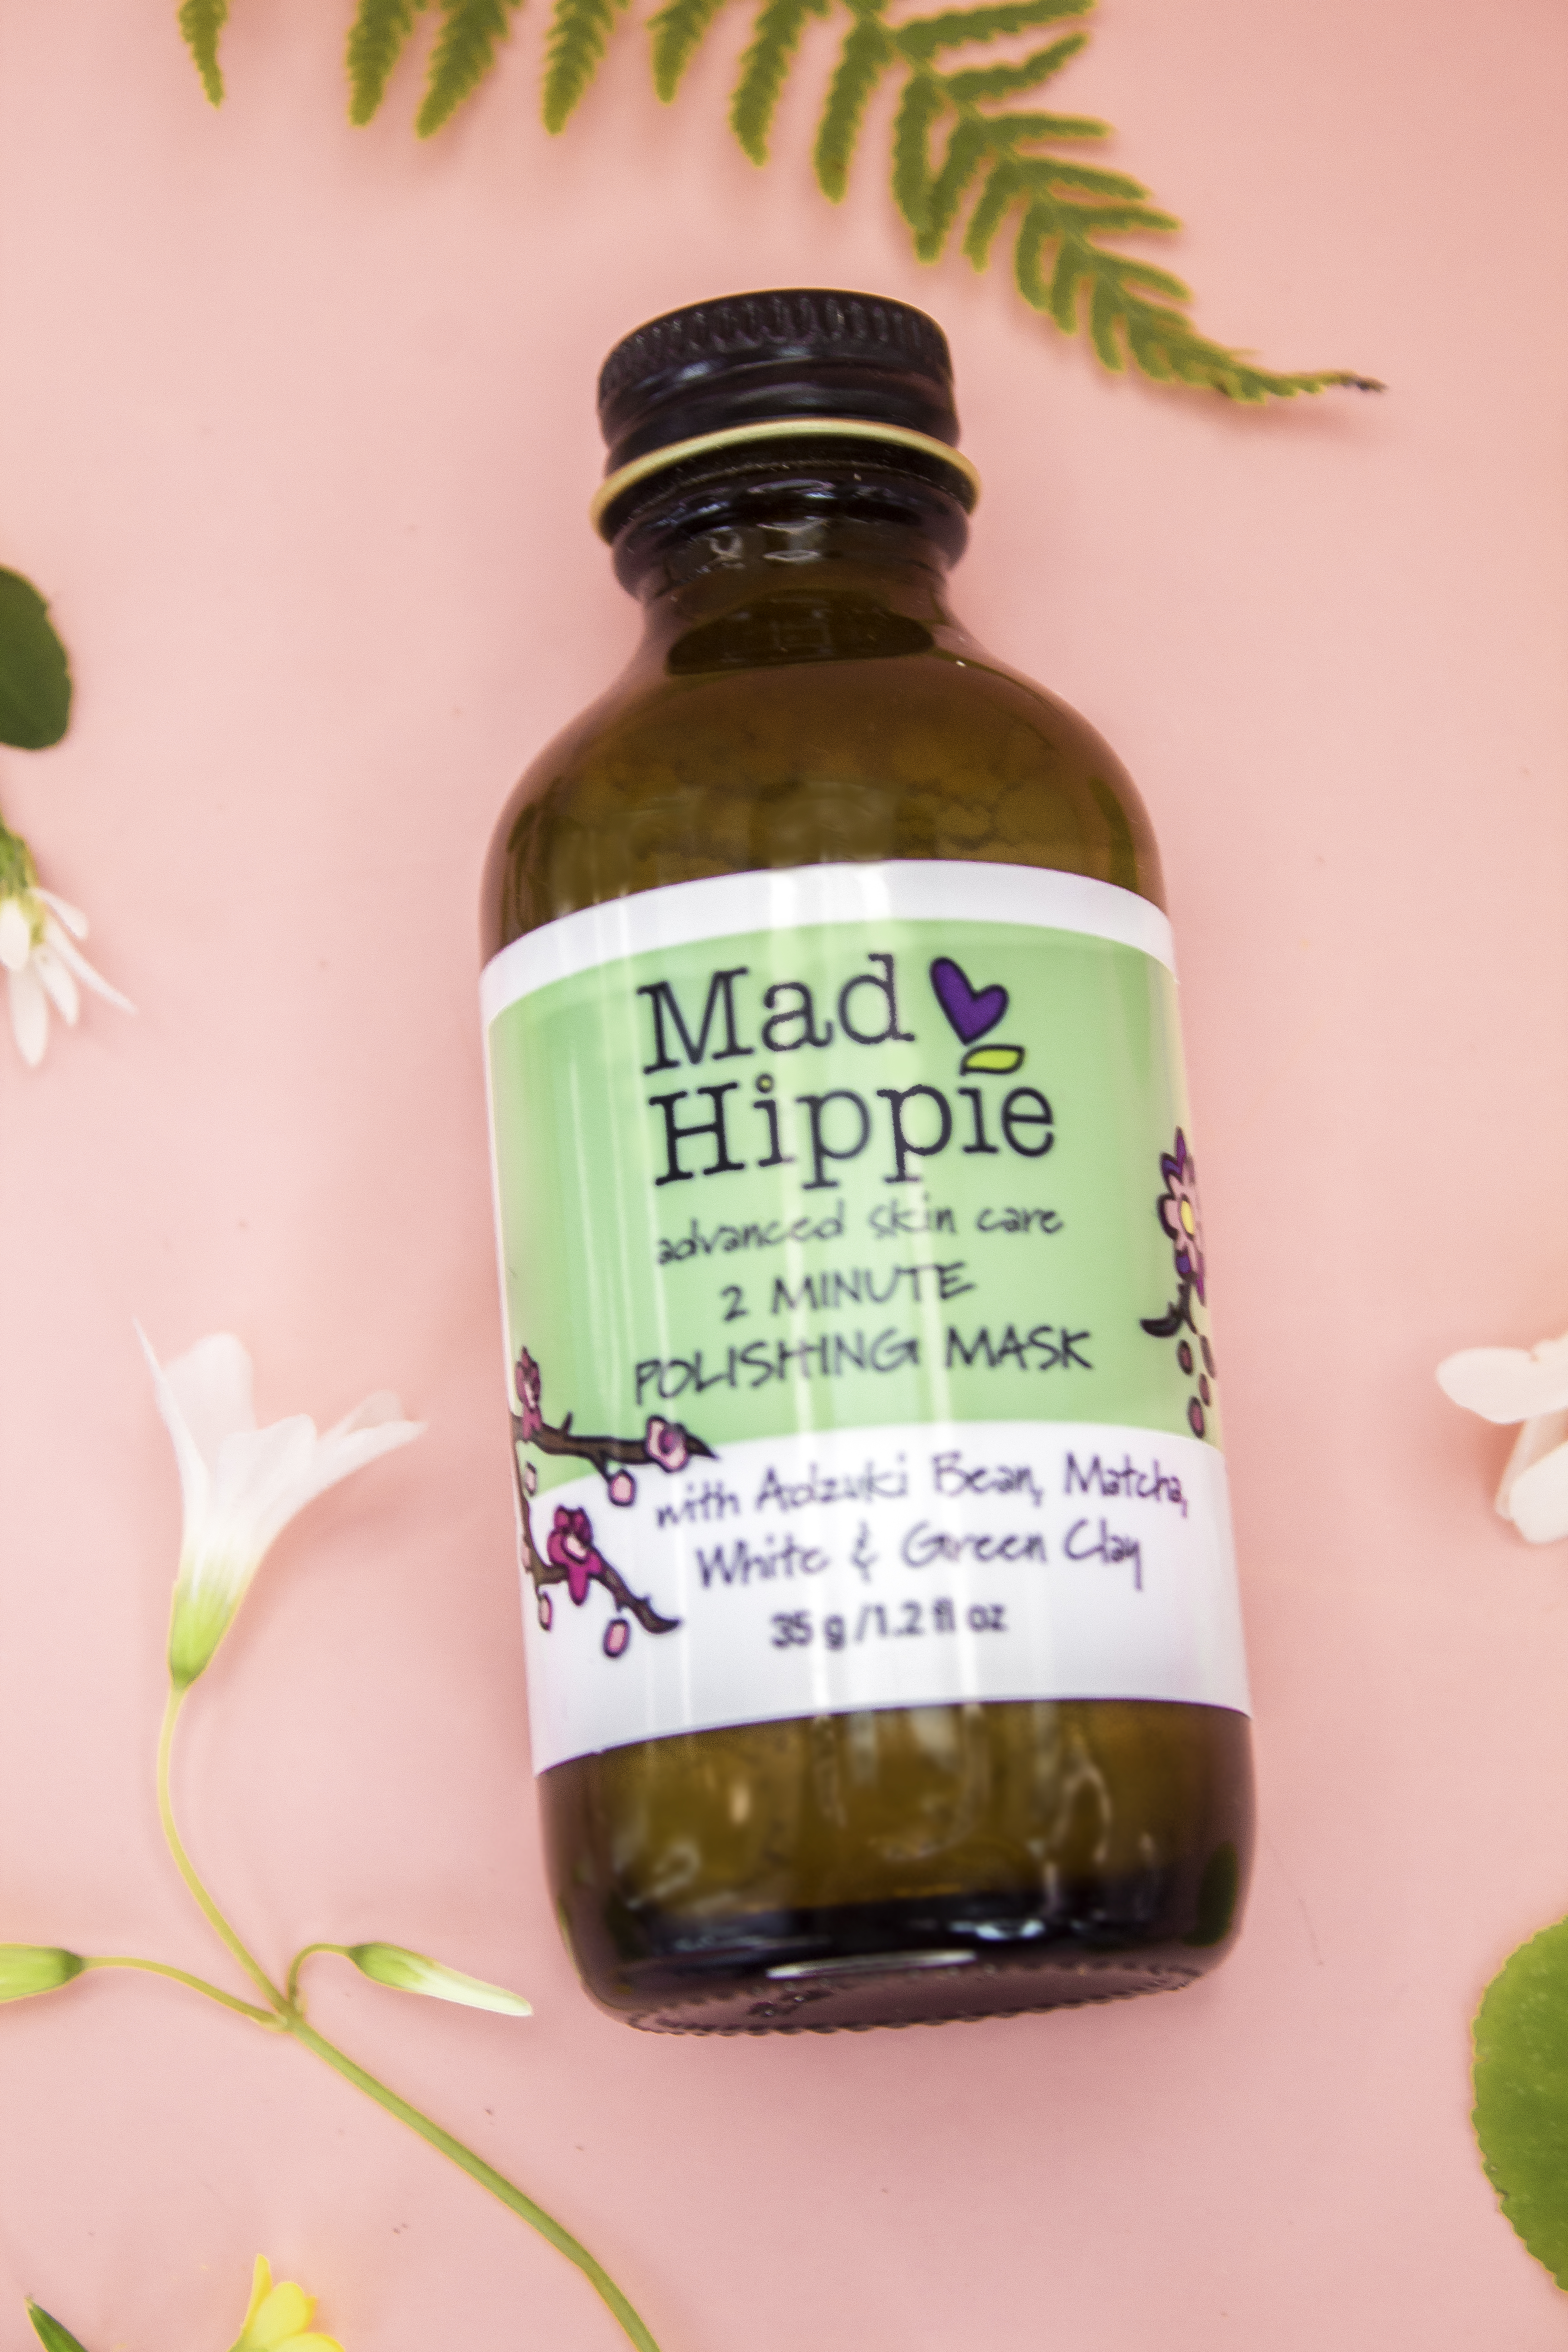 FindÂ Mad Hippie 2 Minute Polishing Mask at Ulta and Mad Hippie